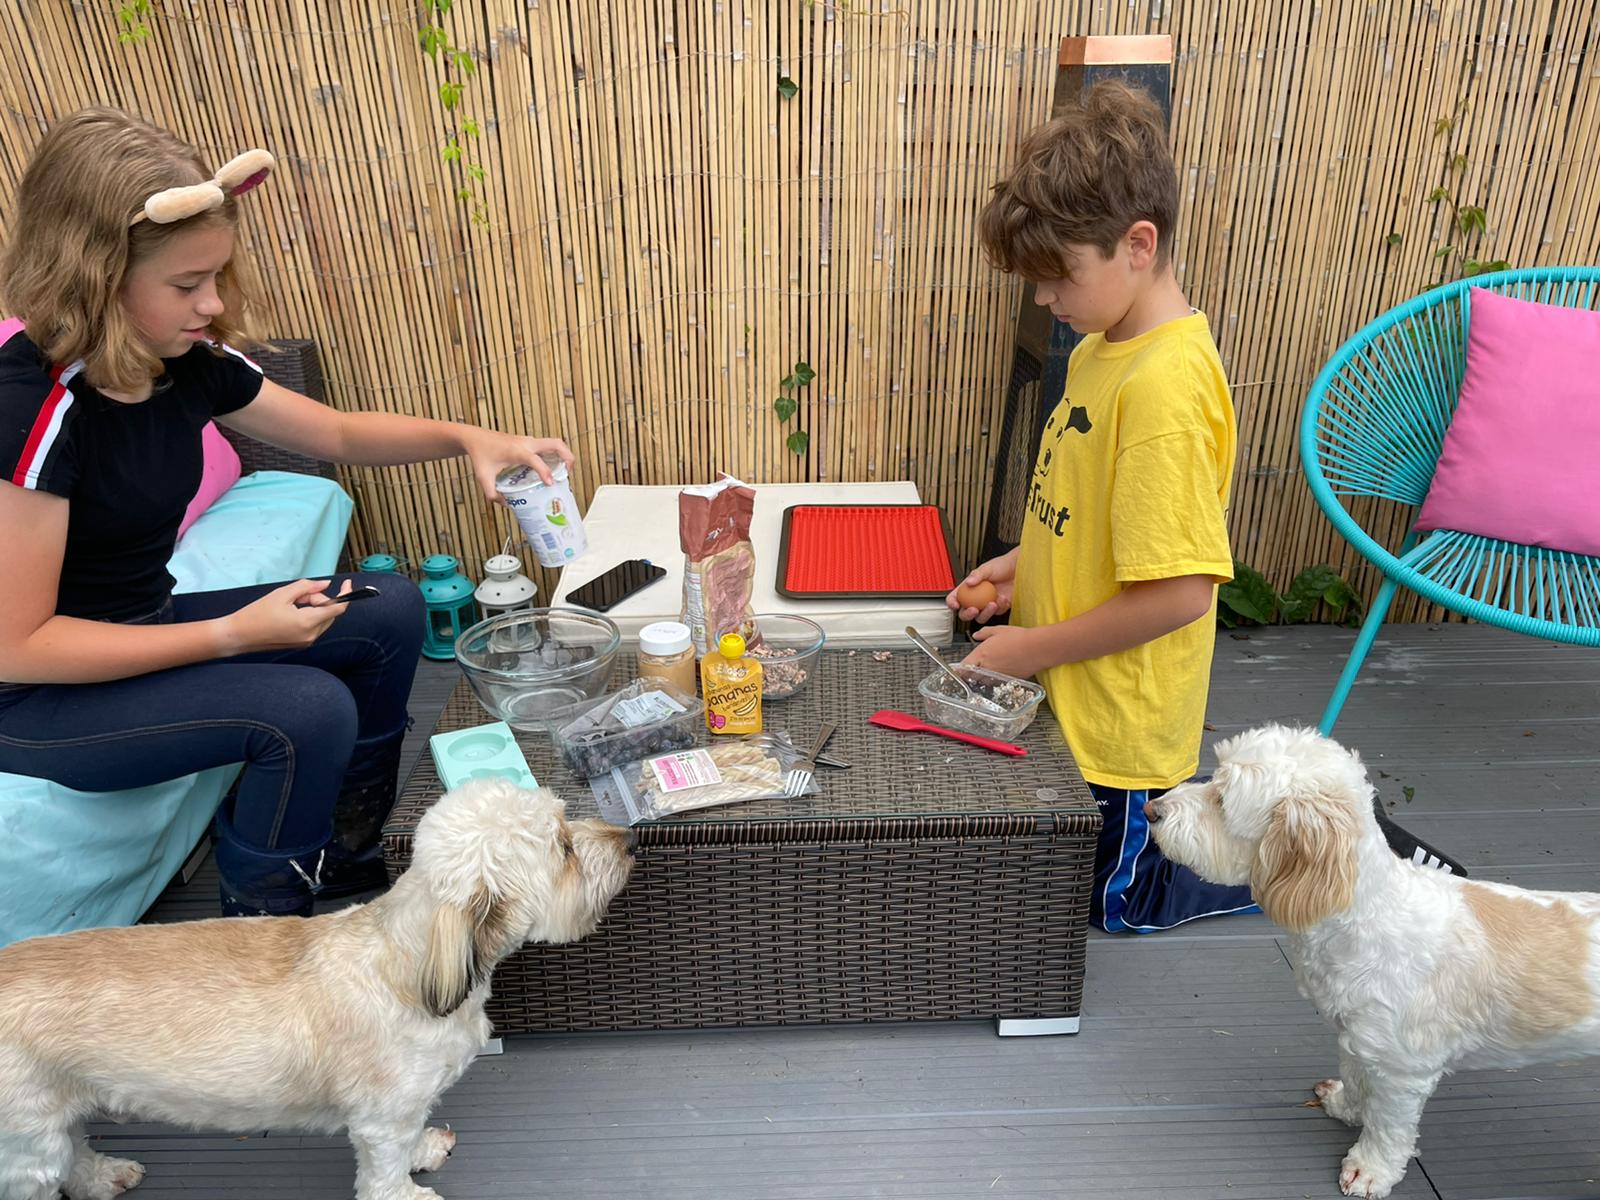 Fun outdoor activities for your kids and dog this summer – that don't cost a fortune